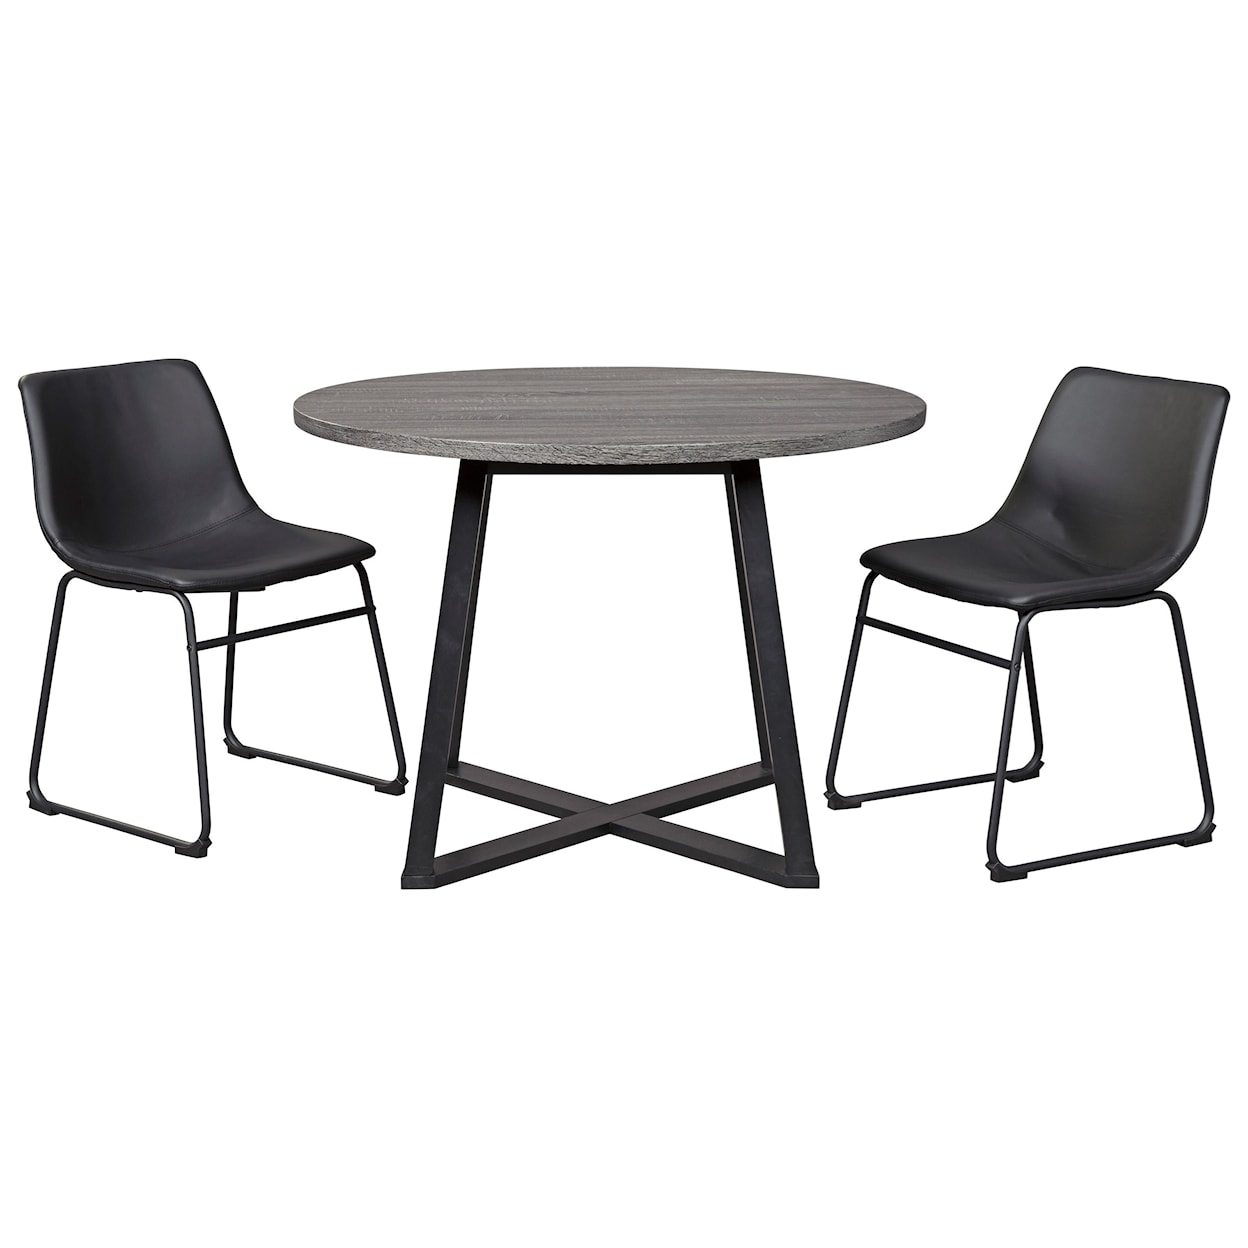 Signature Design by Ashley Centiar 3-Piece Round Dining Table Set